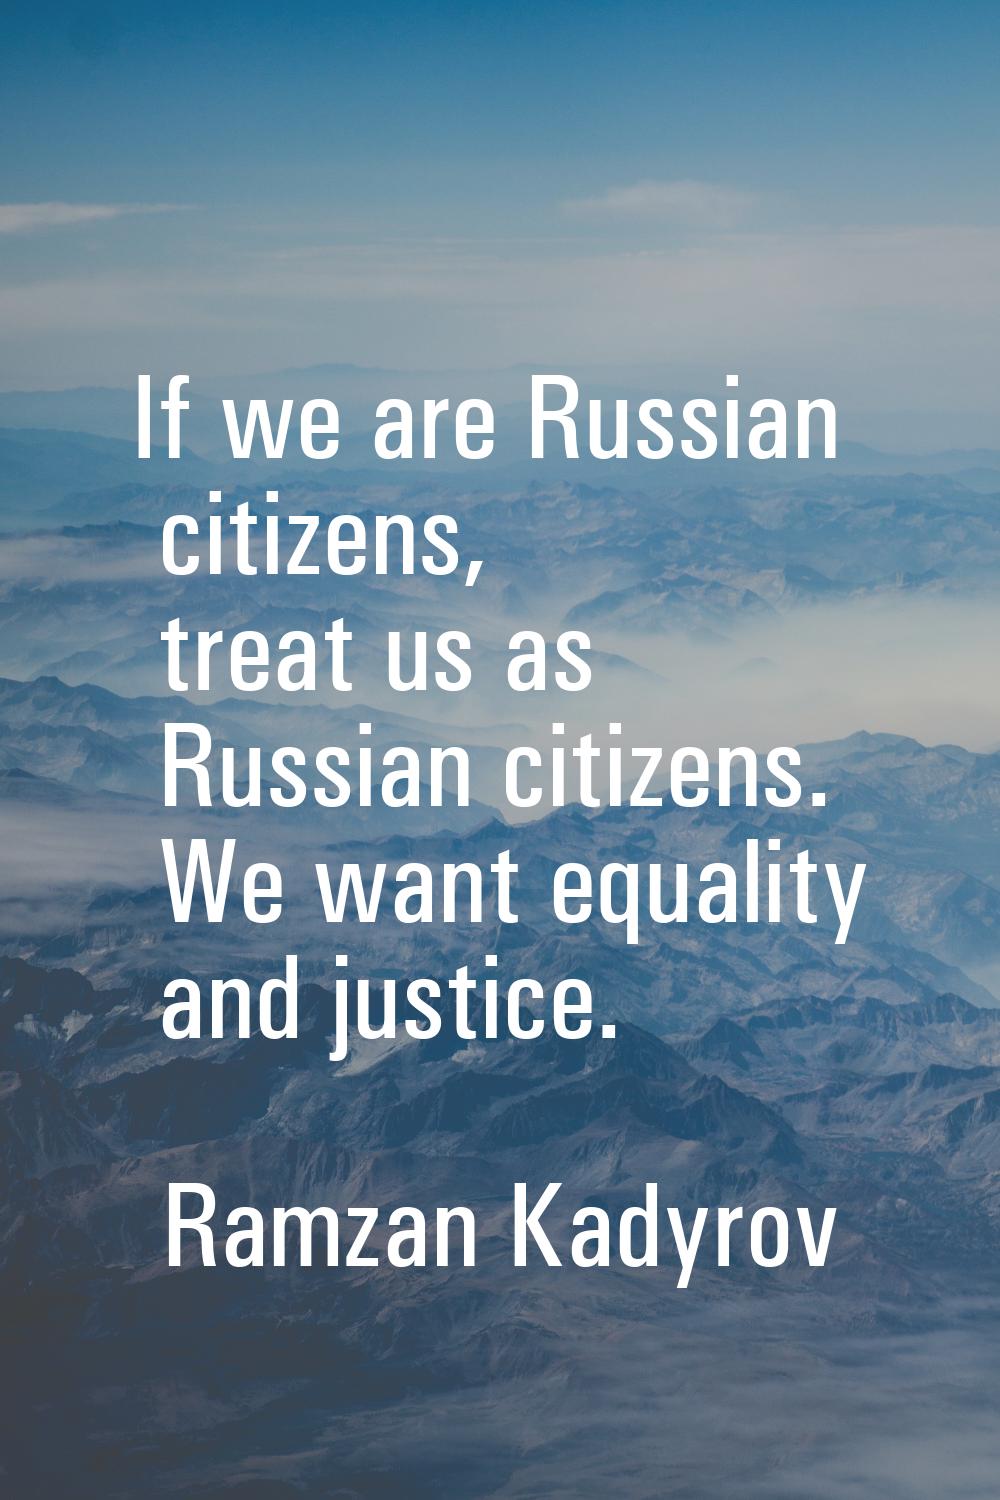 If we are Russian citizens, treat us as Russian citizens. We want equality and justice.